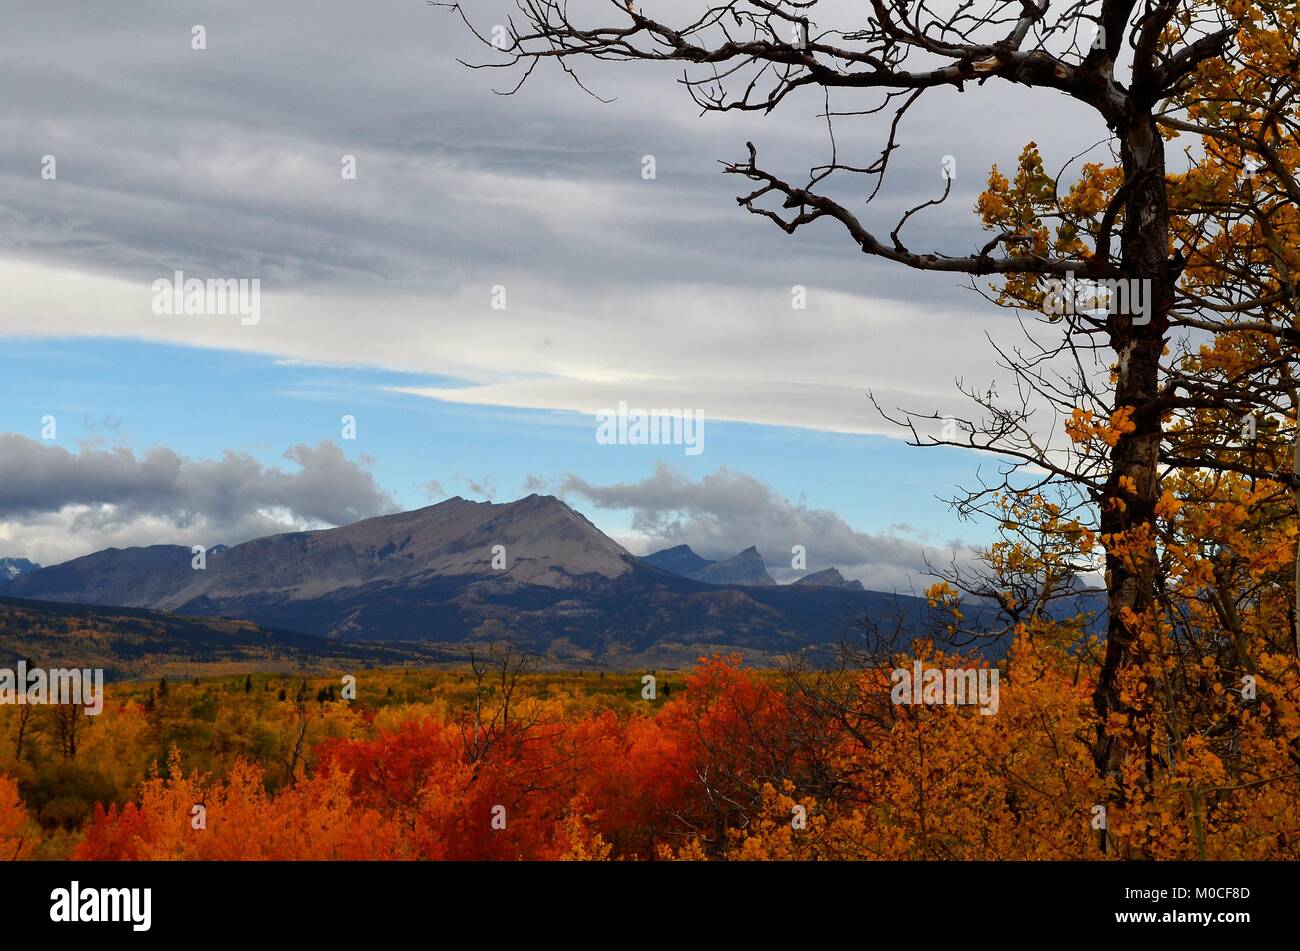 Autumn in the mountains, with an amazing arrangement of fall colors scattering over the landscape Stock Photo